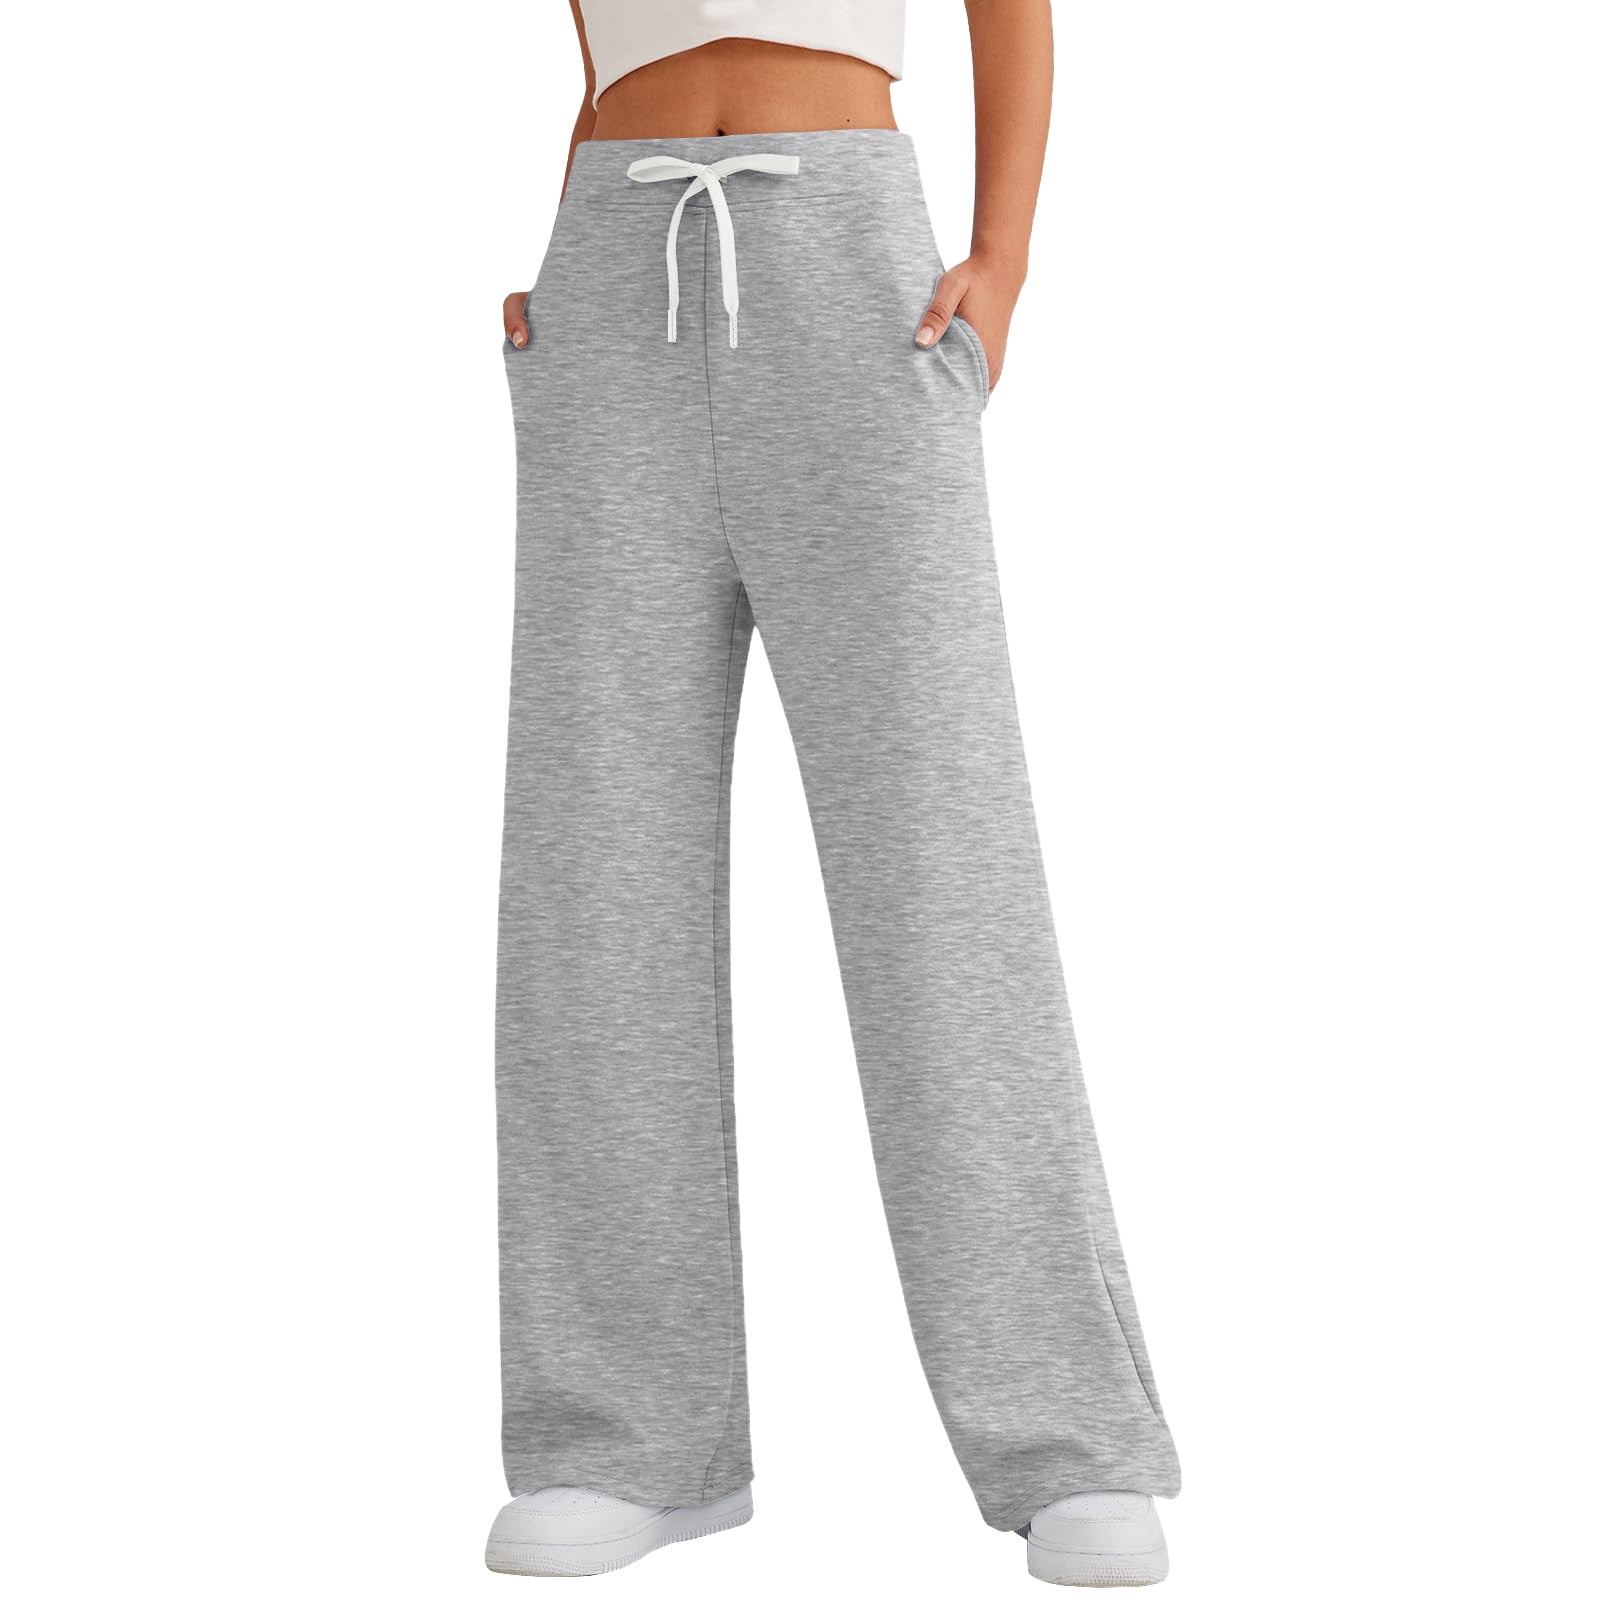 TQWQT Women's Straight Leg Sweatpants 2023 Fall Fashion Cute Teen Girl  Baggy Flare Jogger Palazzo Jogging Sweat Pants Outfits Clothes with Pockets  Light Gray S 